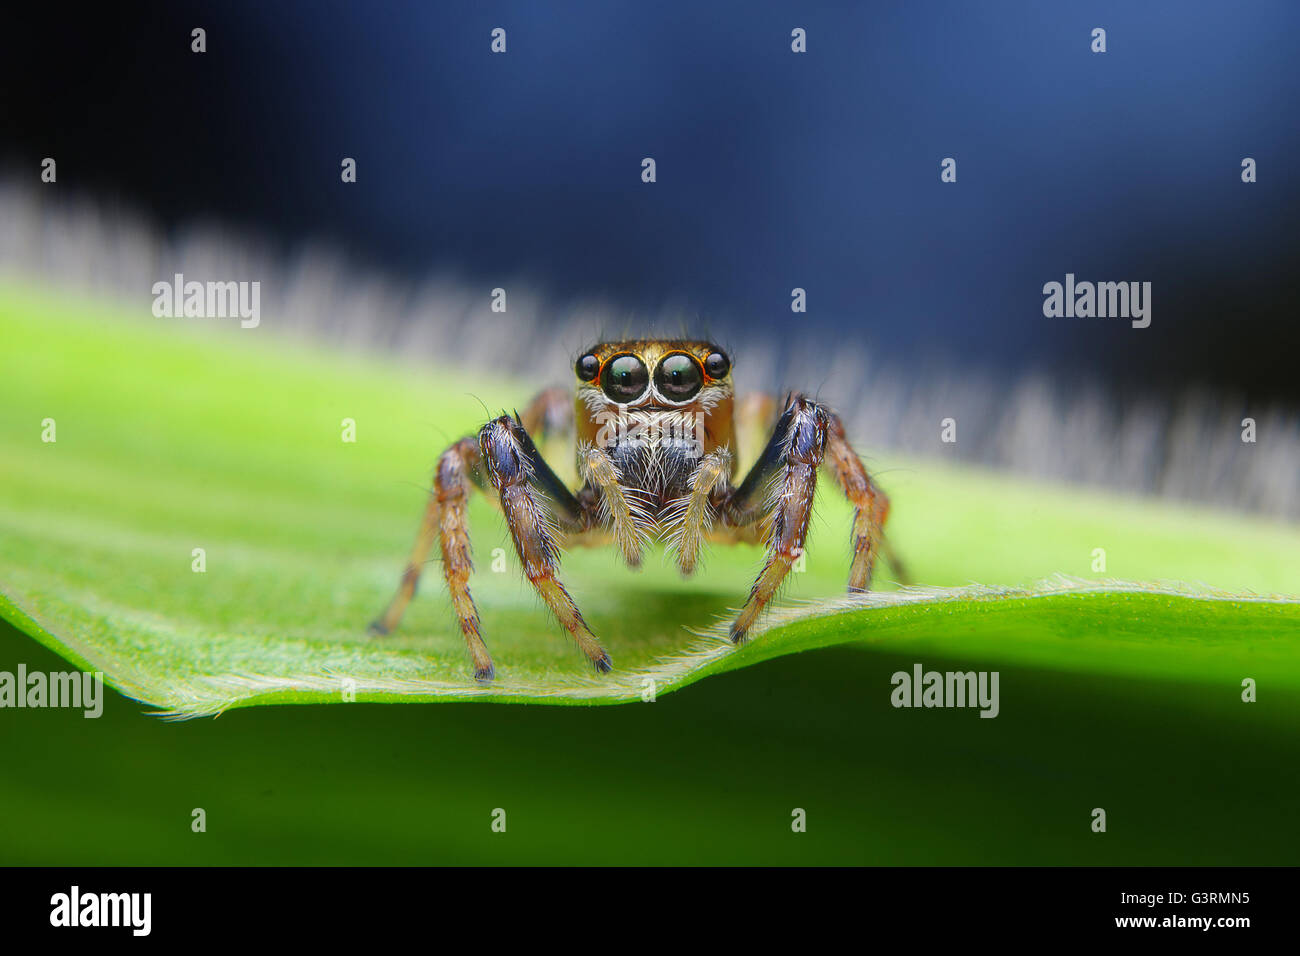 Jumping Spider Macro Photograpgy Stock Photo